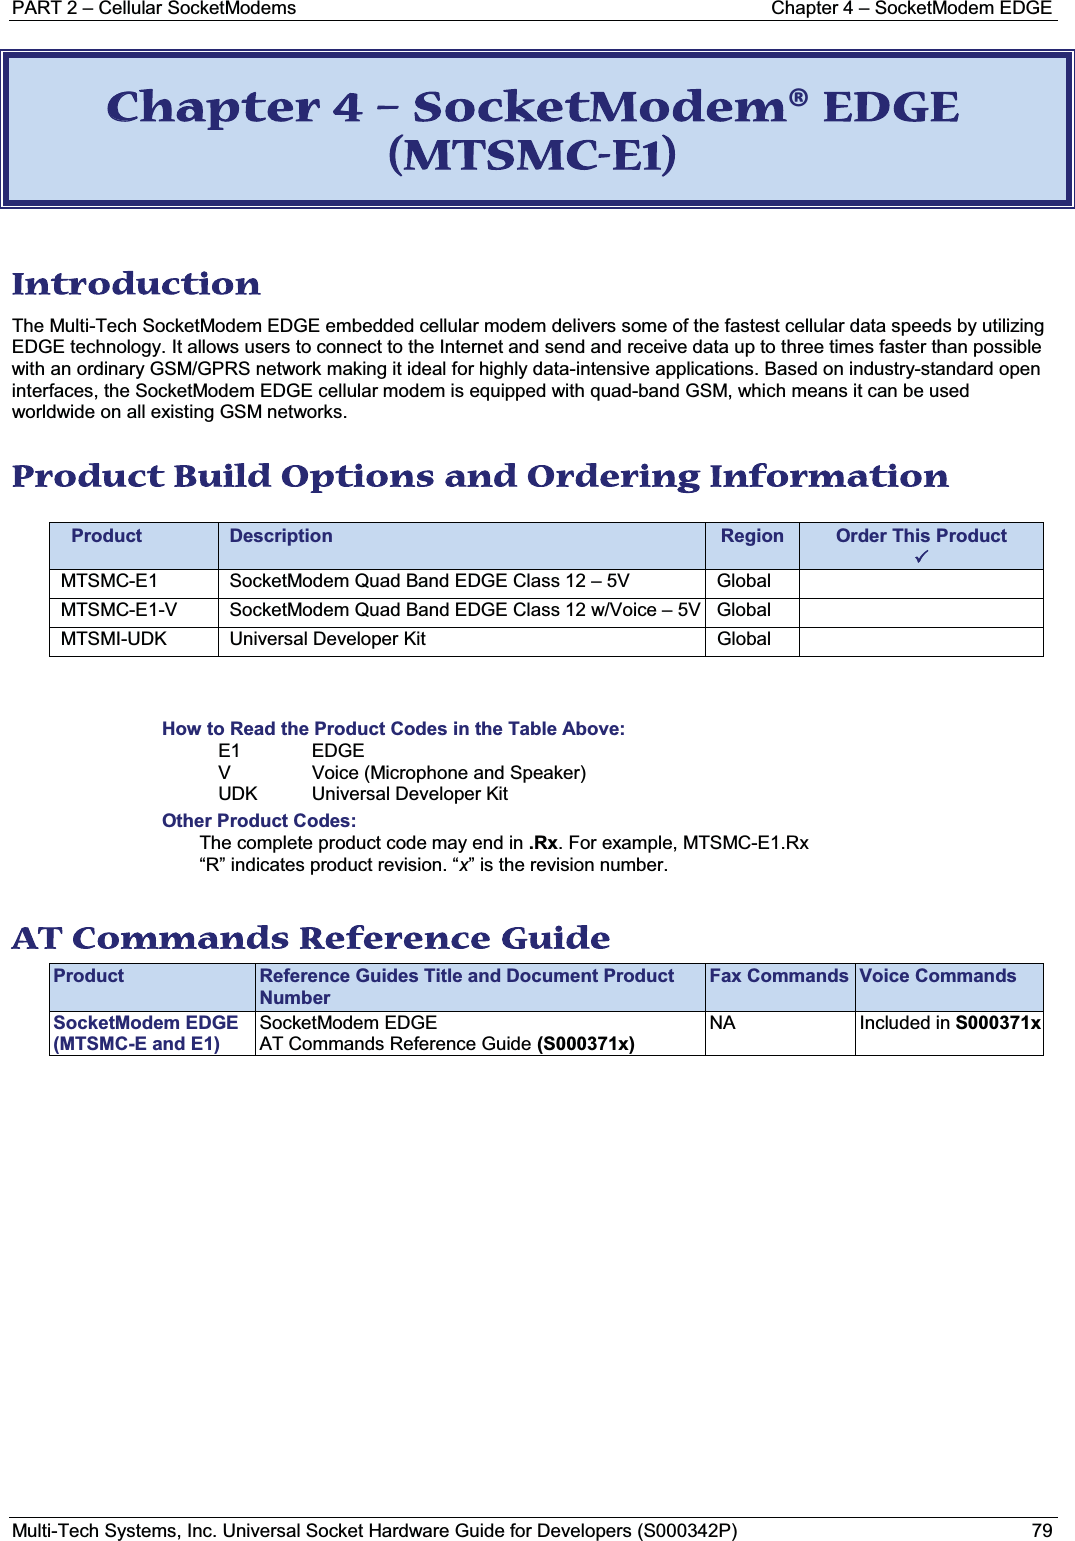 PART 2 – Cellular SocketModems Chapter 4 – SocketModem EDGEMulti-Tech Systems, Inc. Universal Socket Hardware Guide for Developers (S000342P) 79CChapter 4 – SocketModem® EDGE (MTSMC-E1) Introduction The Multi-Tech SocketModem EDGE embedded cellular modem delivers some of the fastest cellular data speeds by utilizing EDGE technology. It allows users to connect to the Internet and send and receive data up to three times faster than possible with an ordinary GSM/GPRS network making it ideal for highly data-intensive applications. Based on industry-standard open interfaces, the SocketModem EDGE cellular modem is equipped with quad-band GSM, which means it can be used worldwide on all existing GSM networks. Product Build Options and Ordering Information Product Description Region Order This Product3 MTSMC-E1 SocketModem Quad Band EDGE Class 12 – 5V GlobalMTSMC-E1-V SocketModem Quad Band EDGE Class 12 w/Voice – 5V GlobalMTSMI-UDK Universal Developer Kit GlobalHow to Read the Product Codes in the Table Above:E1 EDGEV Voice (Microphone and Speaker)UDK Universal Developer KitOther Product Codes:The complete product code may end in .Rx. For example, MTSMC-E1.Rx“R” indicates product revision. “x” is the revision number.AT Commands Reference Guide Product Reference Guides Title and Document Product NumberFax Commands Voice CommandsSocketModem EDGE(MTSMC-E and E1)SocketModem EDGE AT Commands Reference Guide (S000371x)NA Included in S000371x